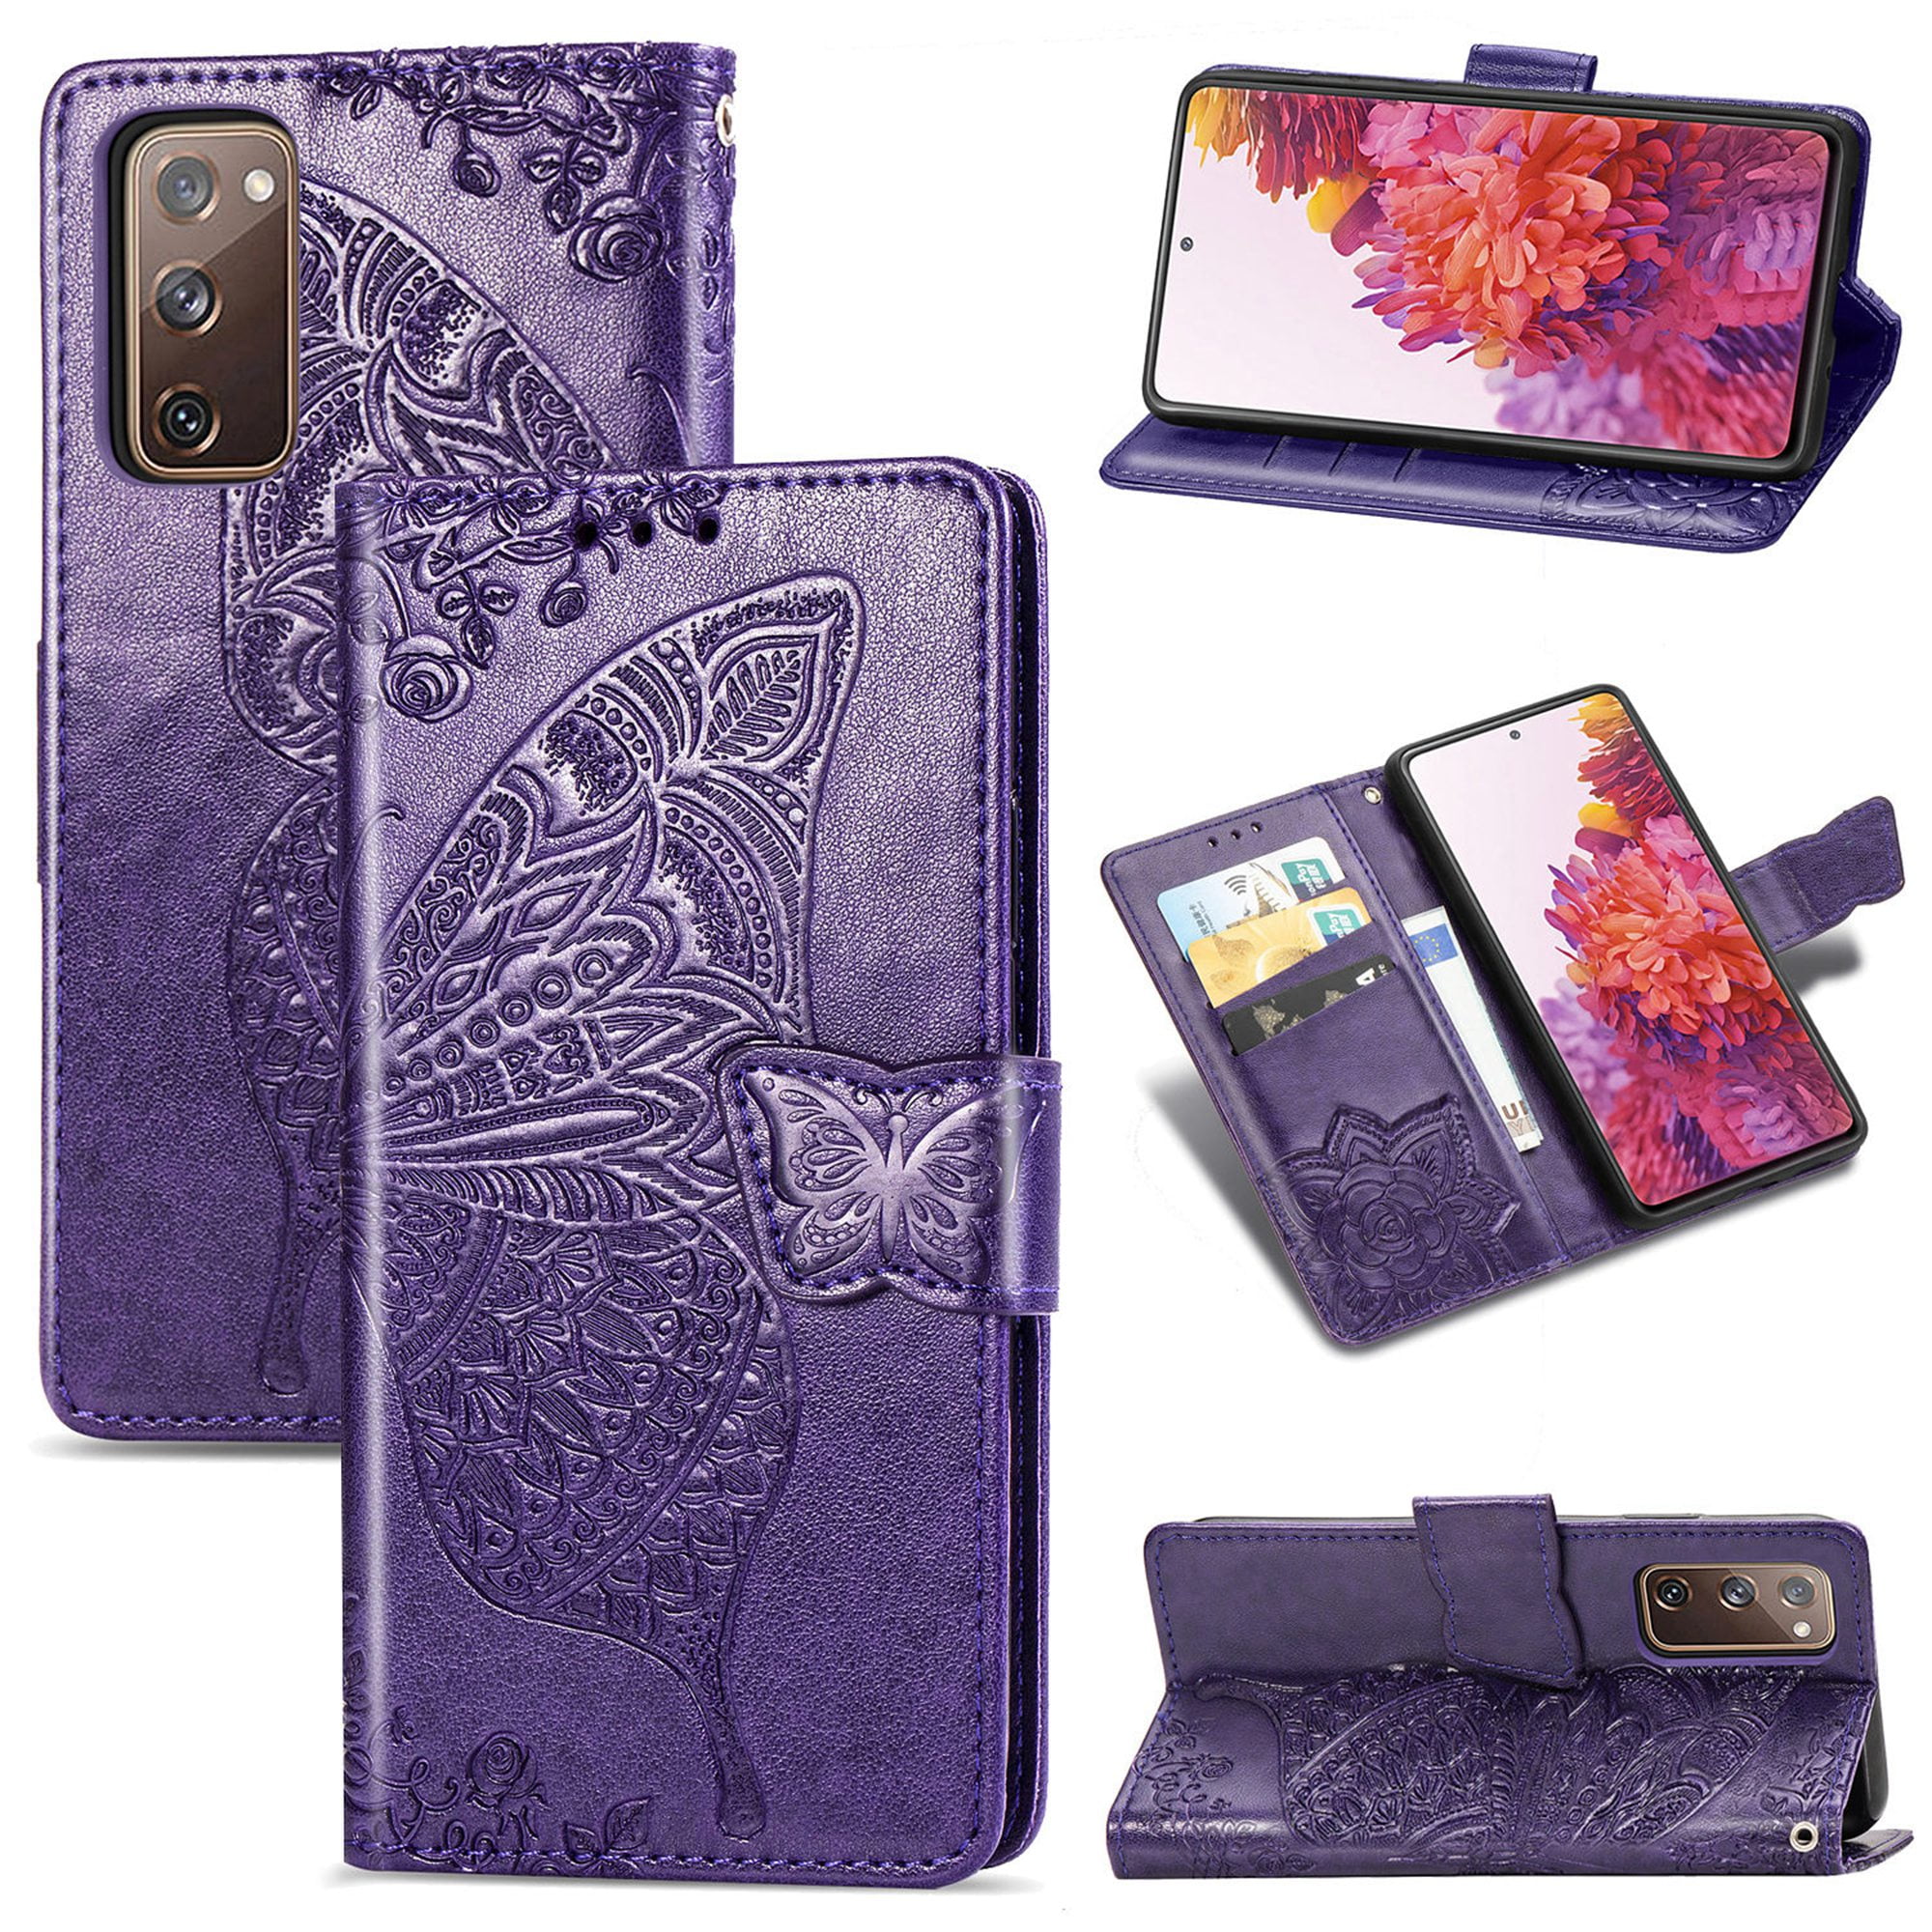 Dteck Case for Samsung Galaxy S20 FE(6.5 inches),Butterfly Patterned ...